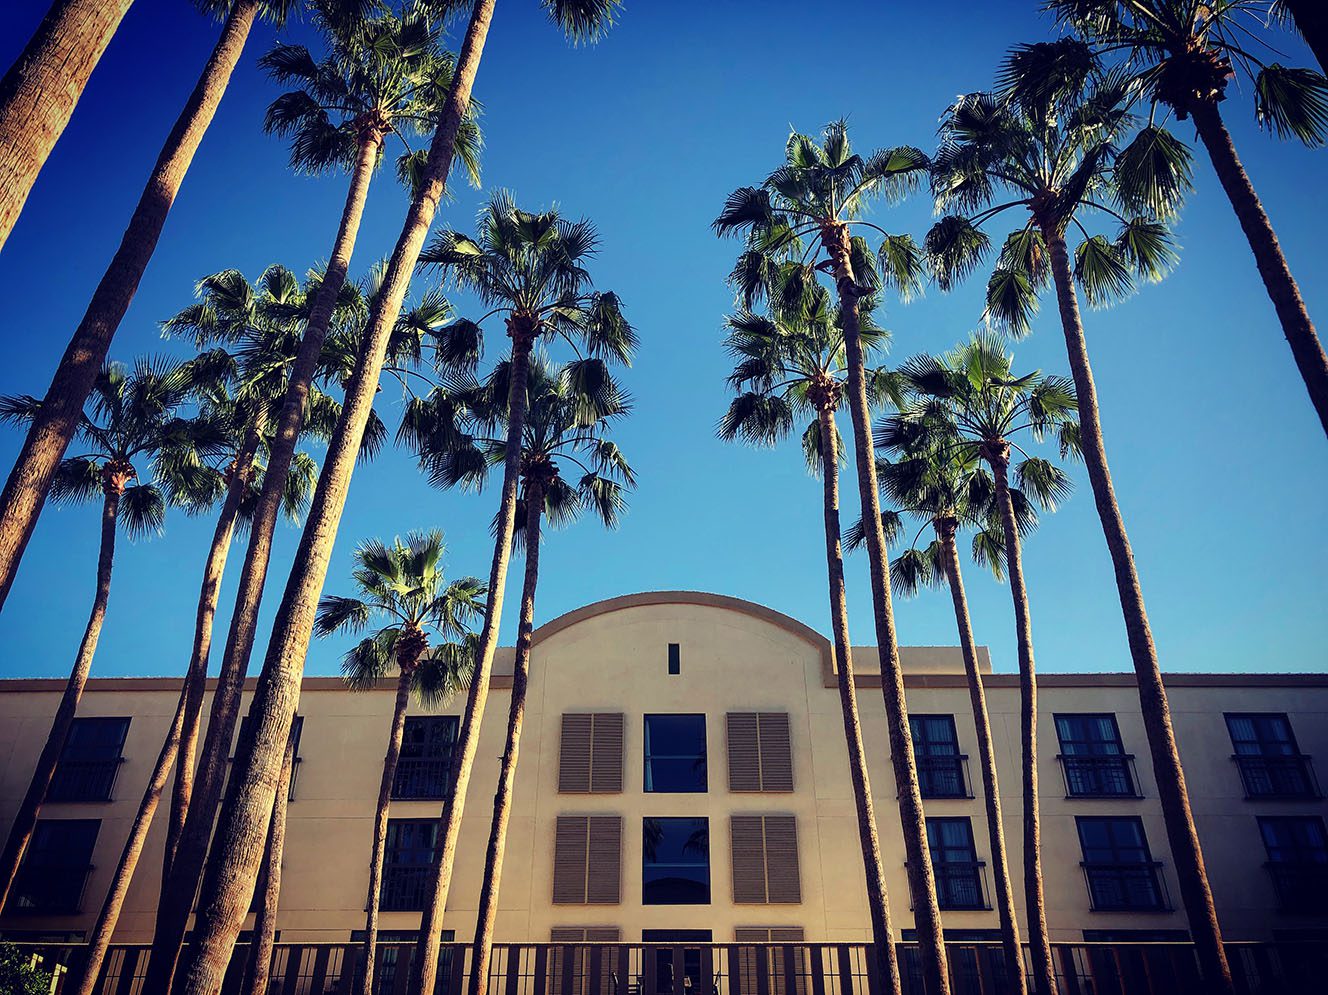 A building with many palm trees in front of it.